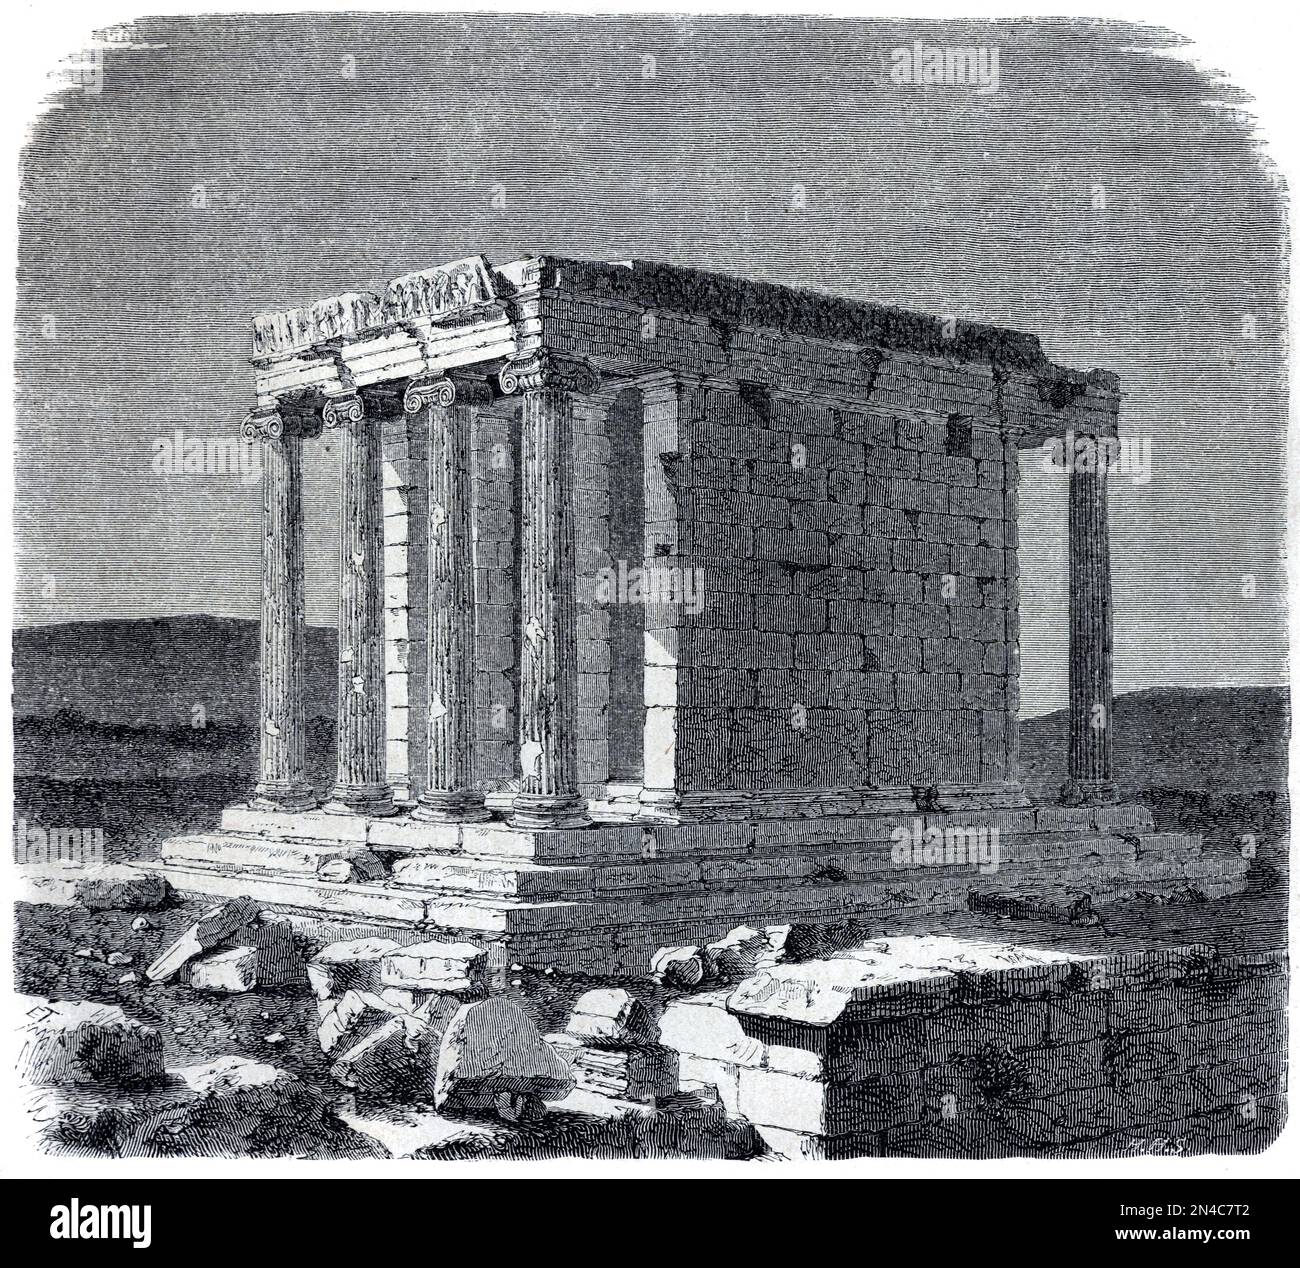 Temple of Athena Nike (420BC) ionic temple on the Acropolis of Athens, dedicated to Athena and Nike, Athens Greece. Vintage Engraving or Illustration 1862 Stock Photo